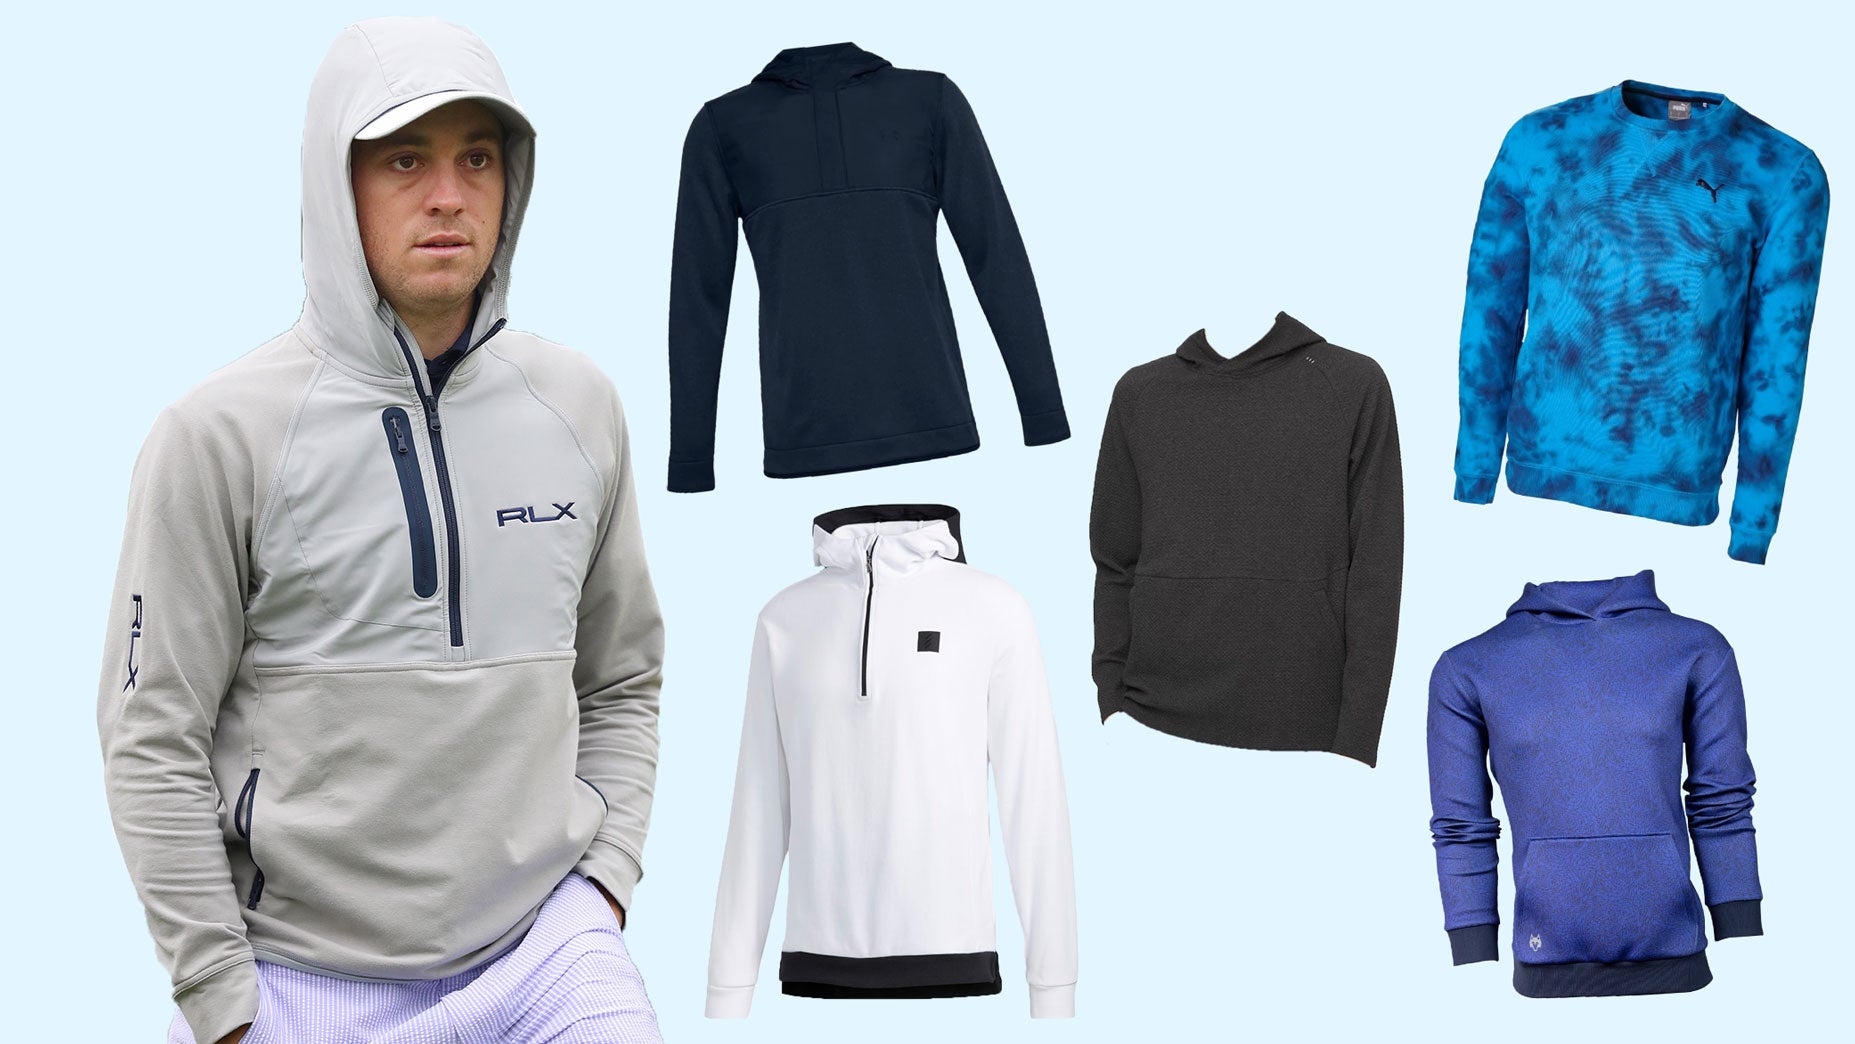 en anden skelet kasket 6 golf layering pieces inspired by PGA Championship style